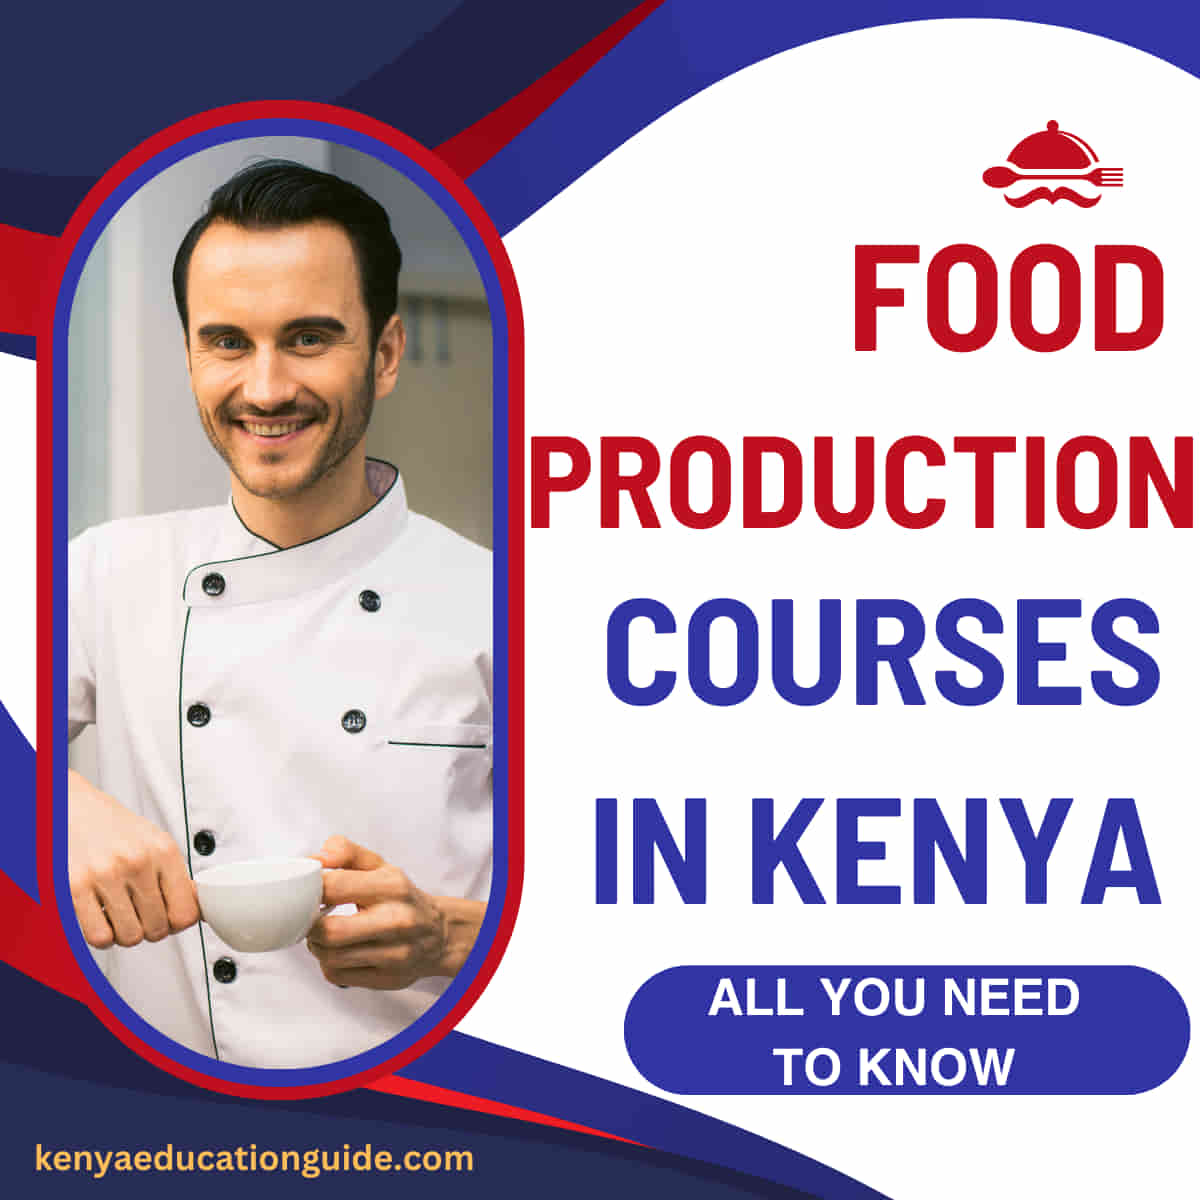 Food production courses in Kenya